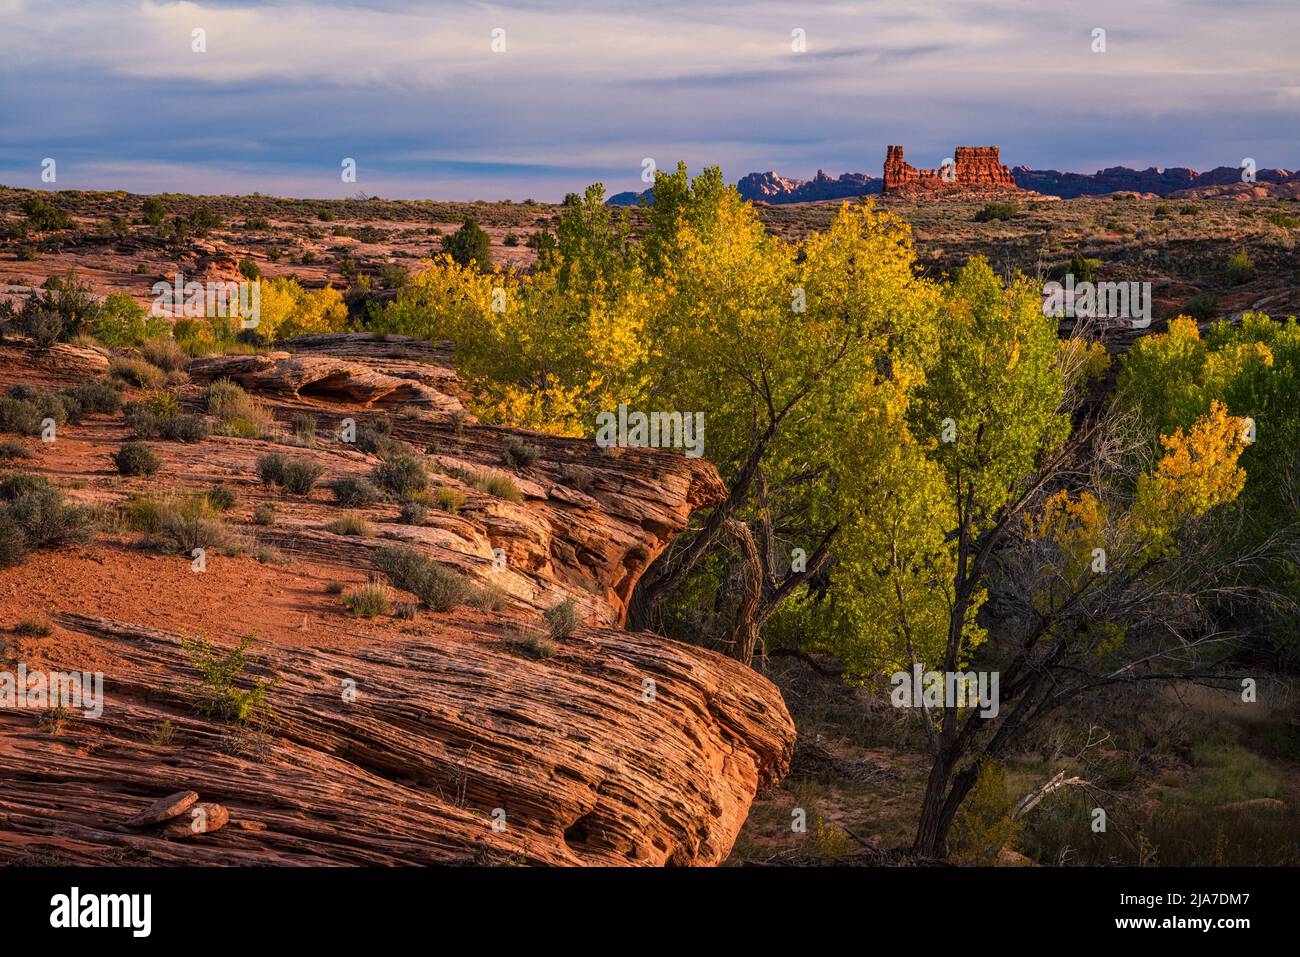 Autumn cottonwoods and red rocks of Arches National Park in Utah Stock Photo